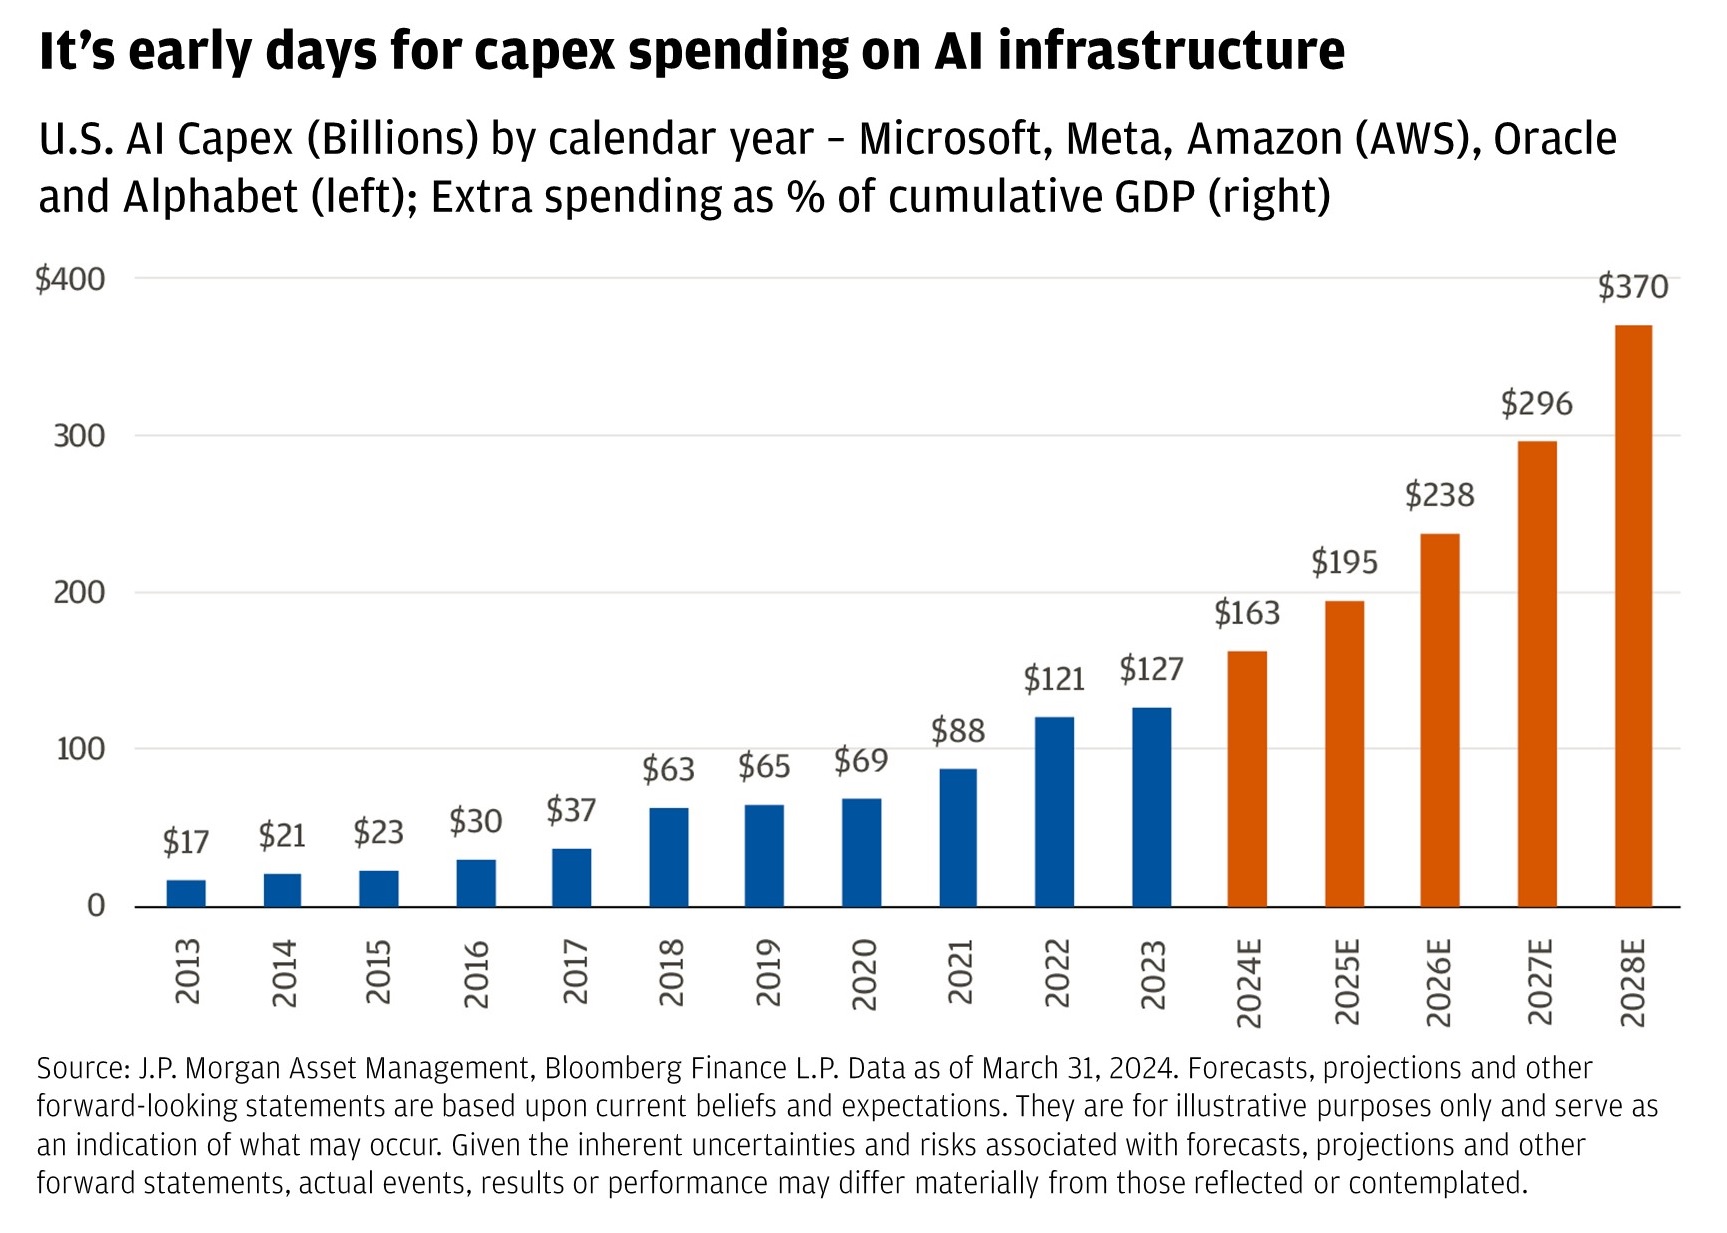 Chart describes U.S. AI capex (billions) by calendar year from Microsoft, Meta, Amazon (AWS), Oracle and Alphabet.